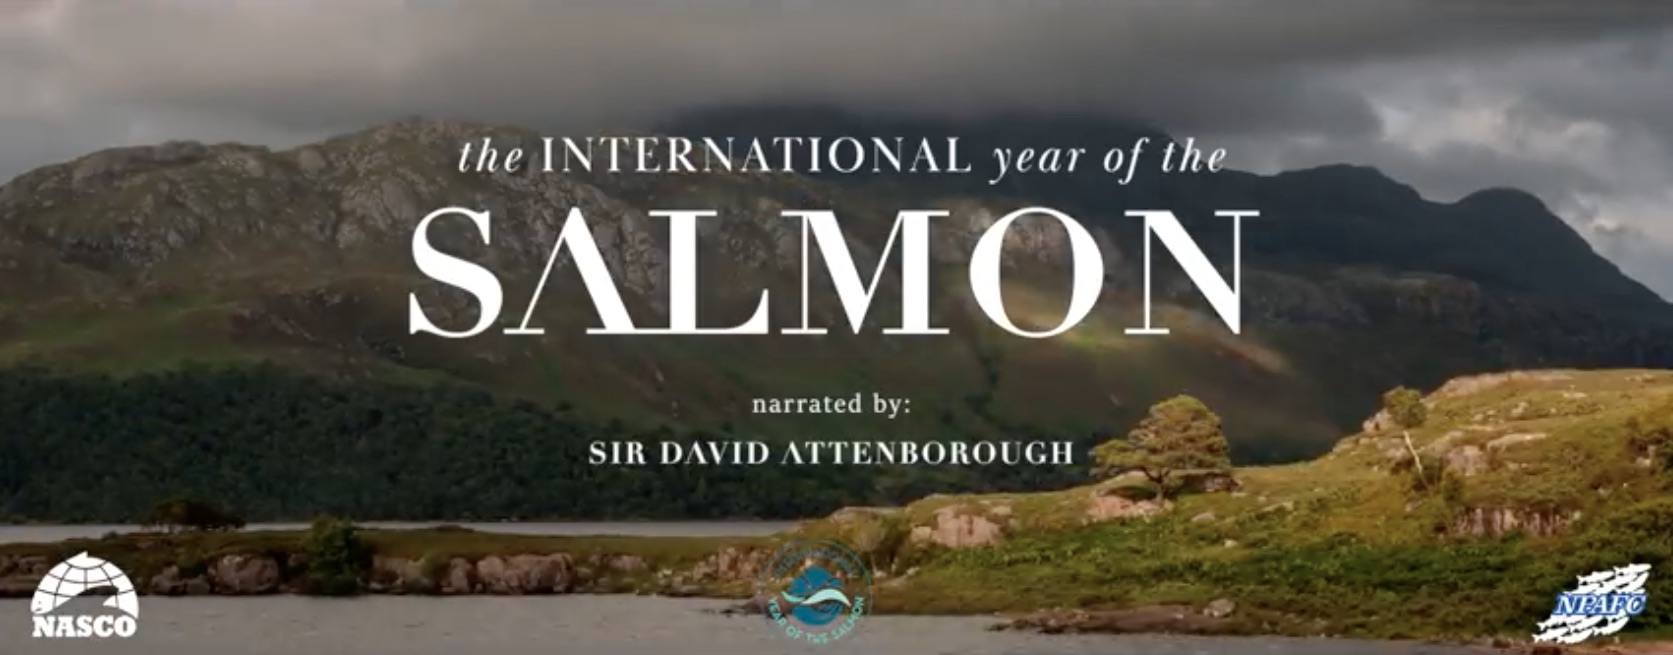 International Year of the Salmon video, narrated by Sir David Attenborough.